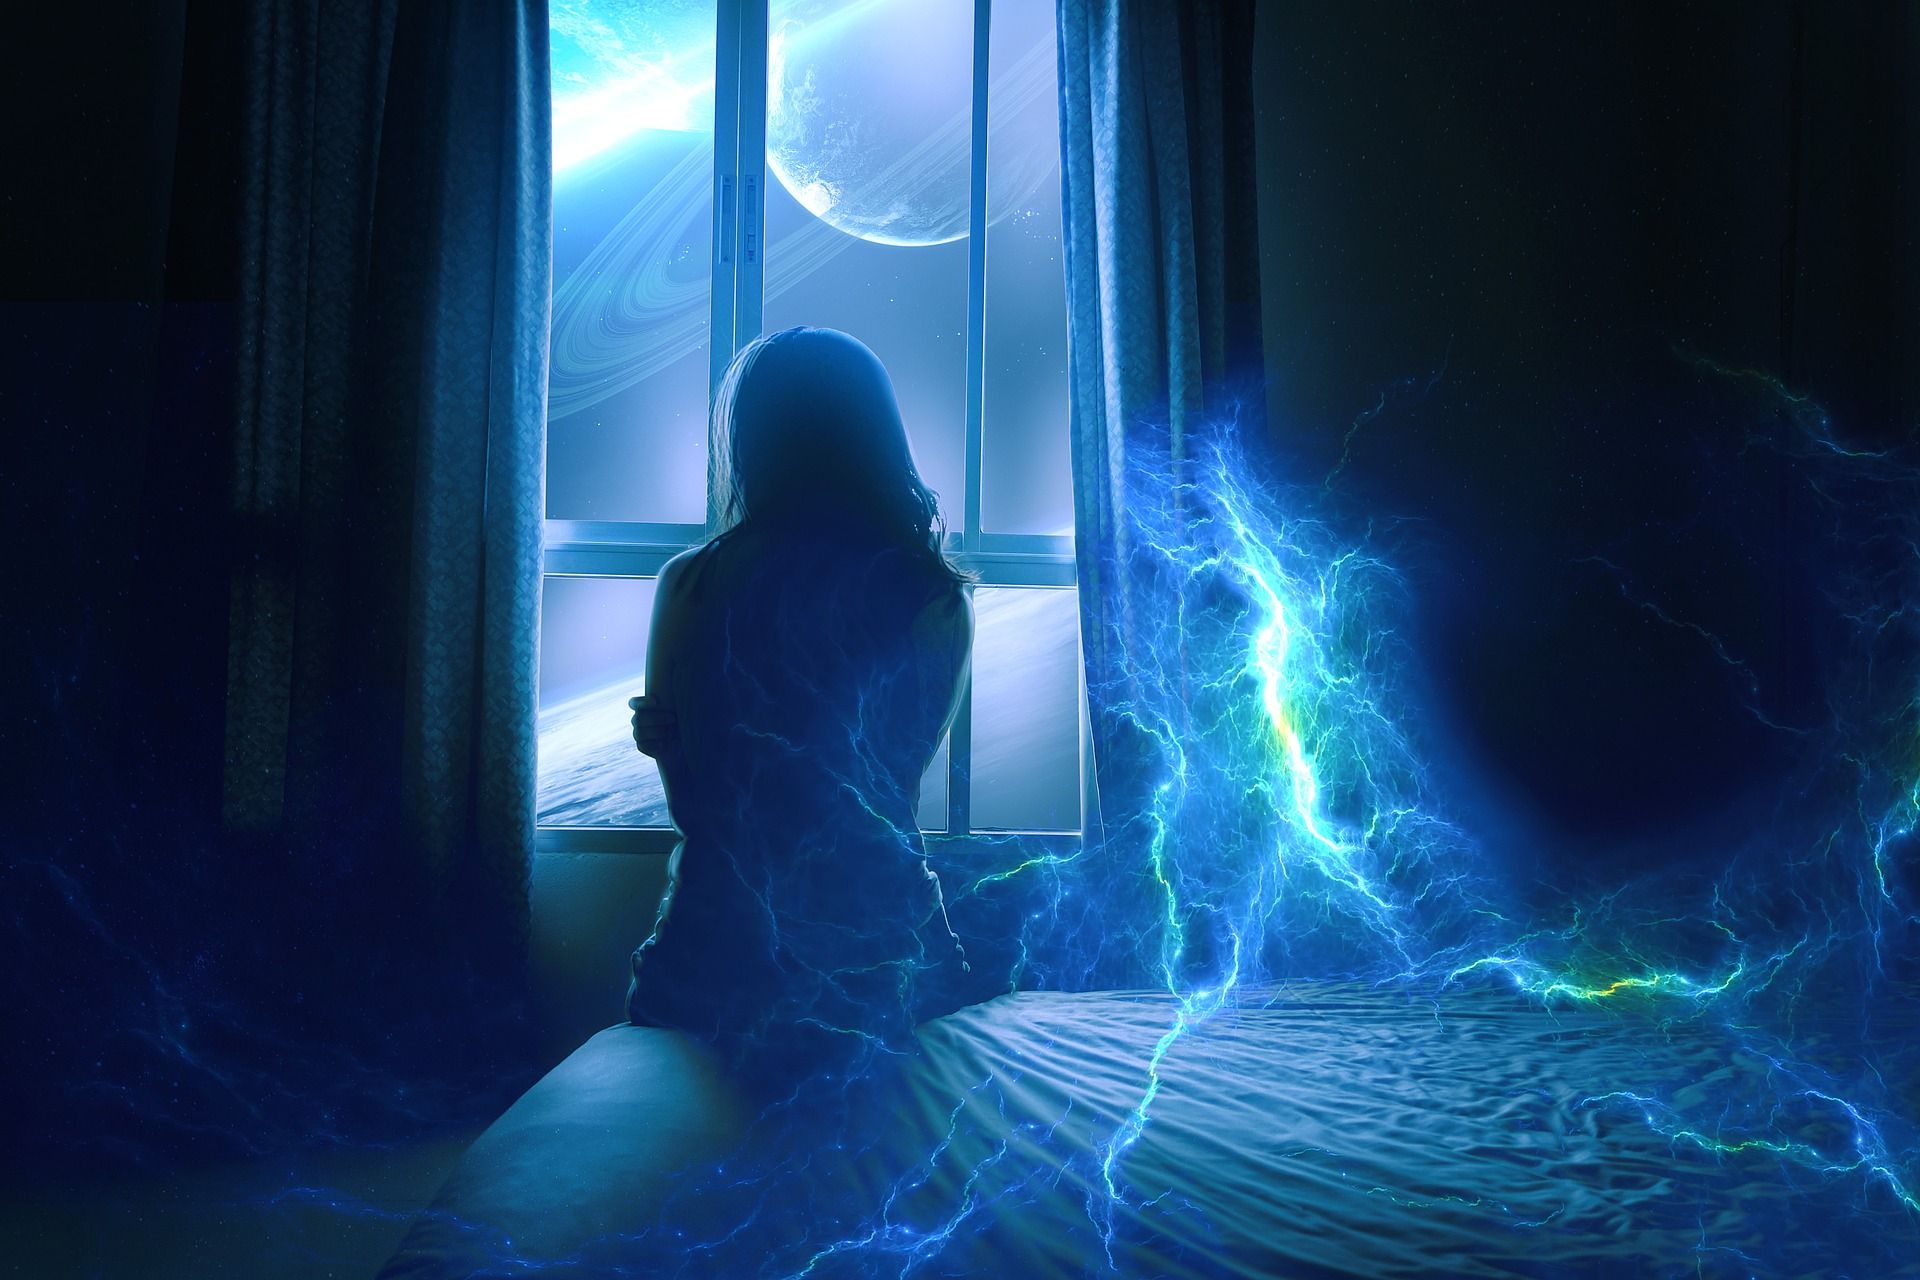  A woman sitting on a bed and looking out the window at a starry night sky with a bright shining guardian spirit.